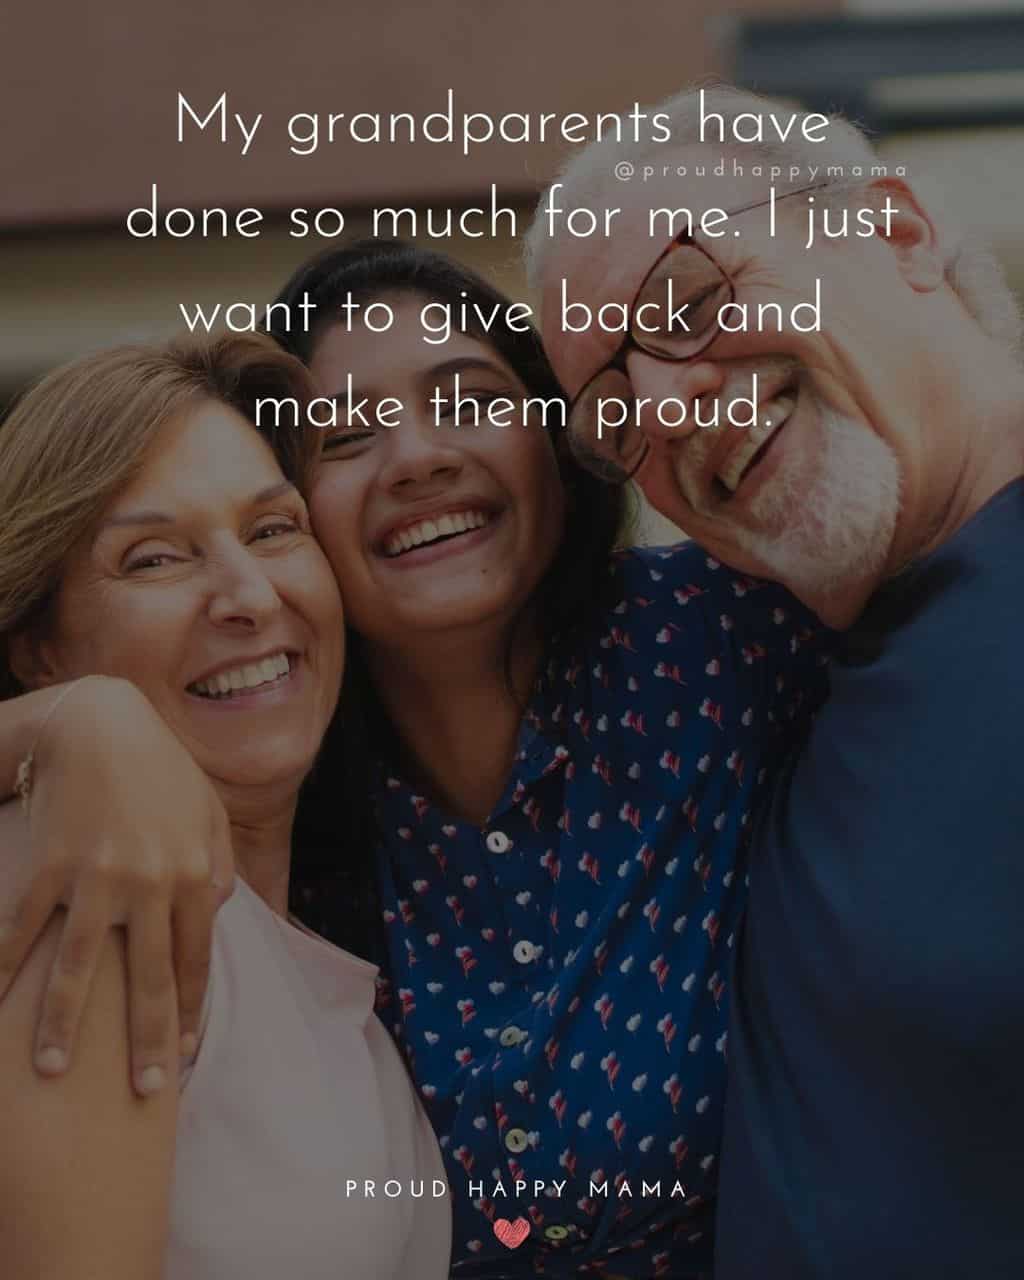 Grandparent Quotes – My grandparents have done so much for me. I just want to give back and make them proud.’